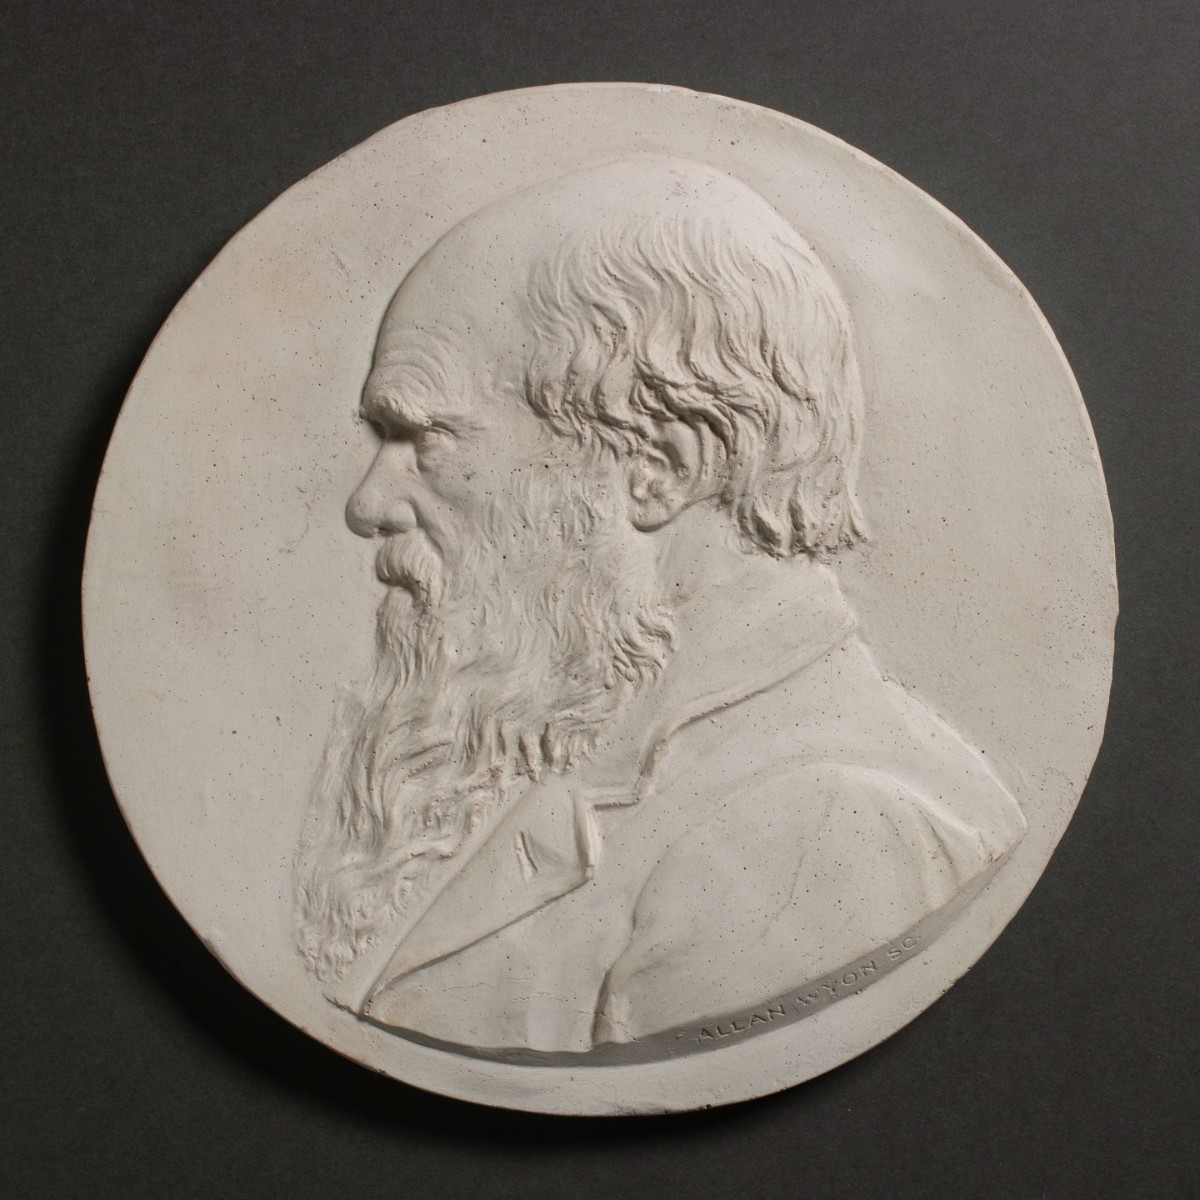 It's Darwin Day! 🌿 Did you know that Charles Darwin was the grandson of Josiah Wedgwood I? Born #OnThisDay in 1809, Darwin went on to revolutionise the study of natural history. Here he is depicted on a Wedgwood mould.